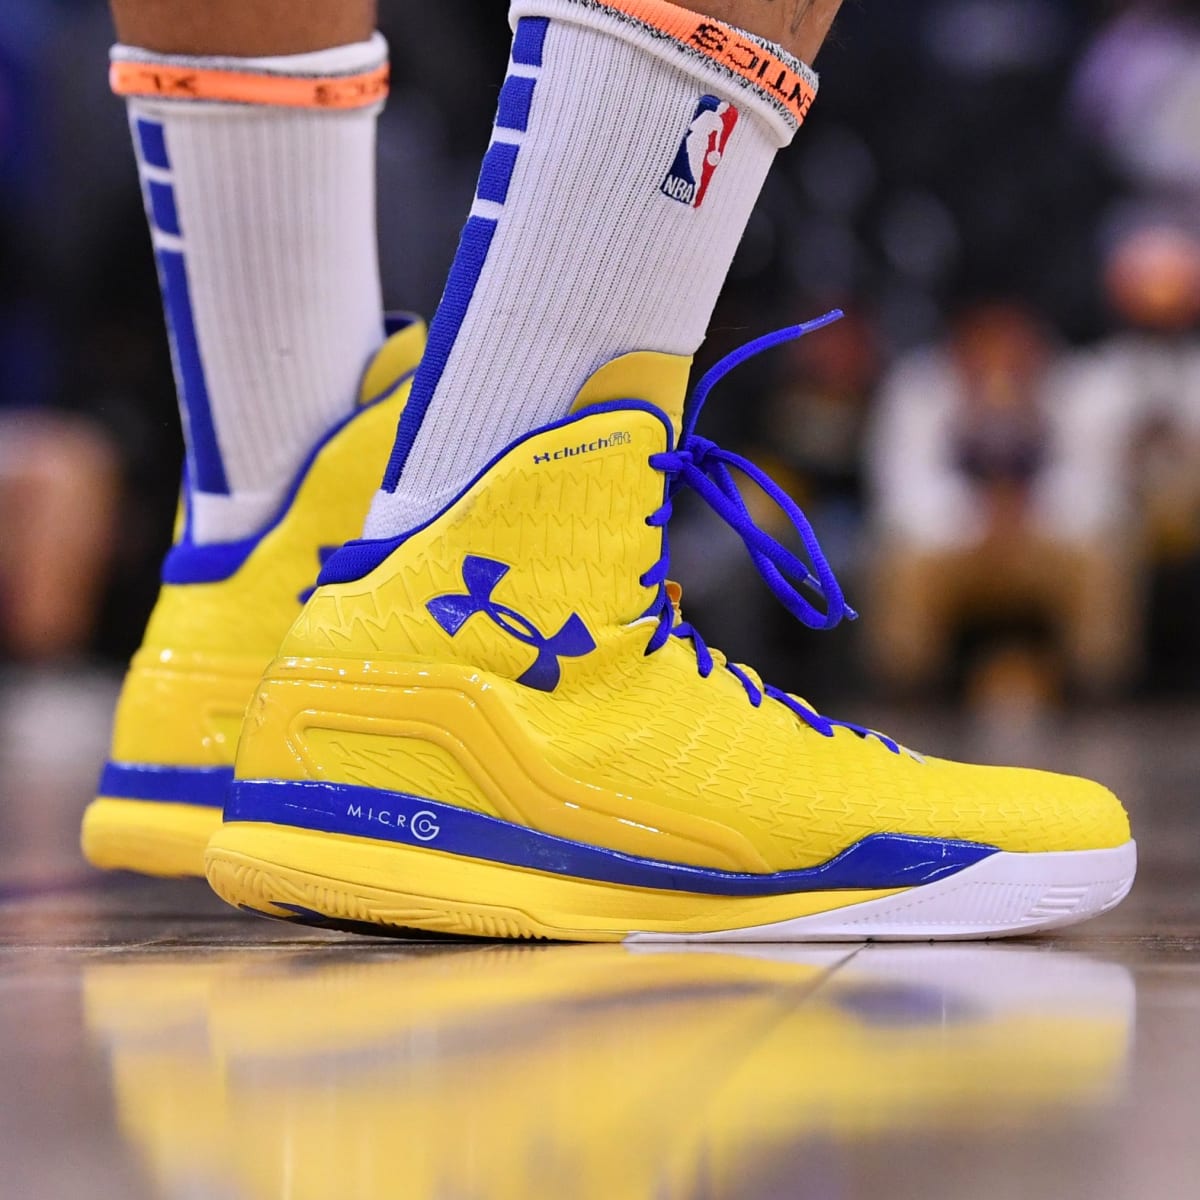 Under Armour Sales Jump 30% As Stephen Curry Shoes Prove A Slam Dunk